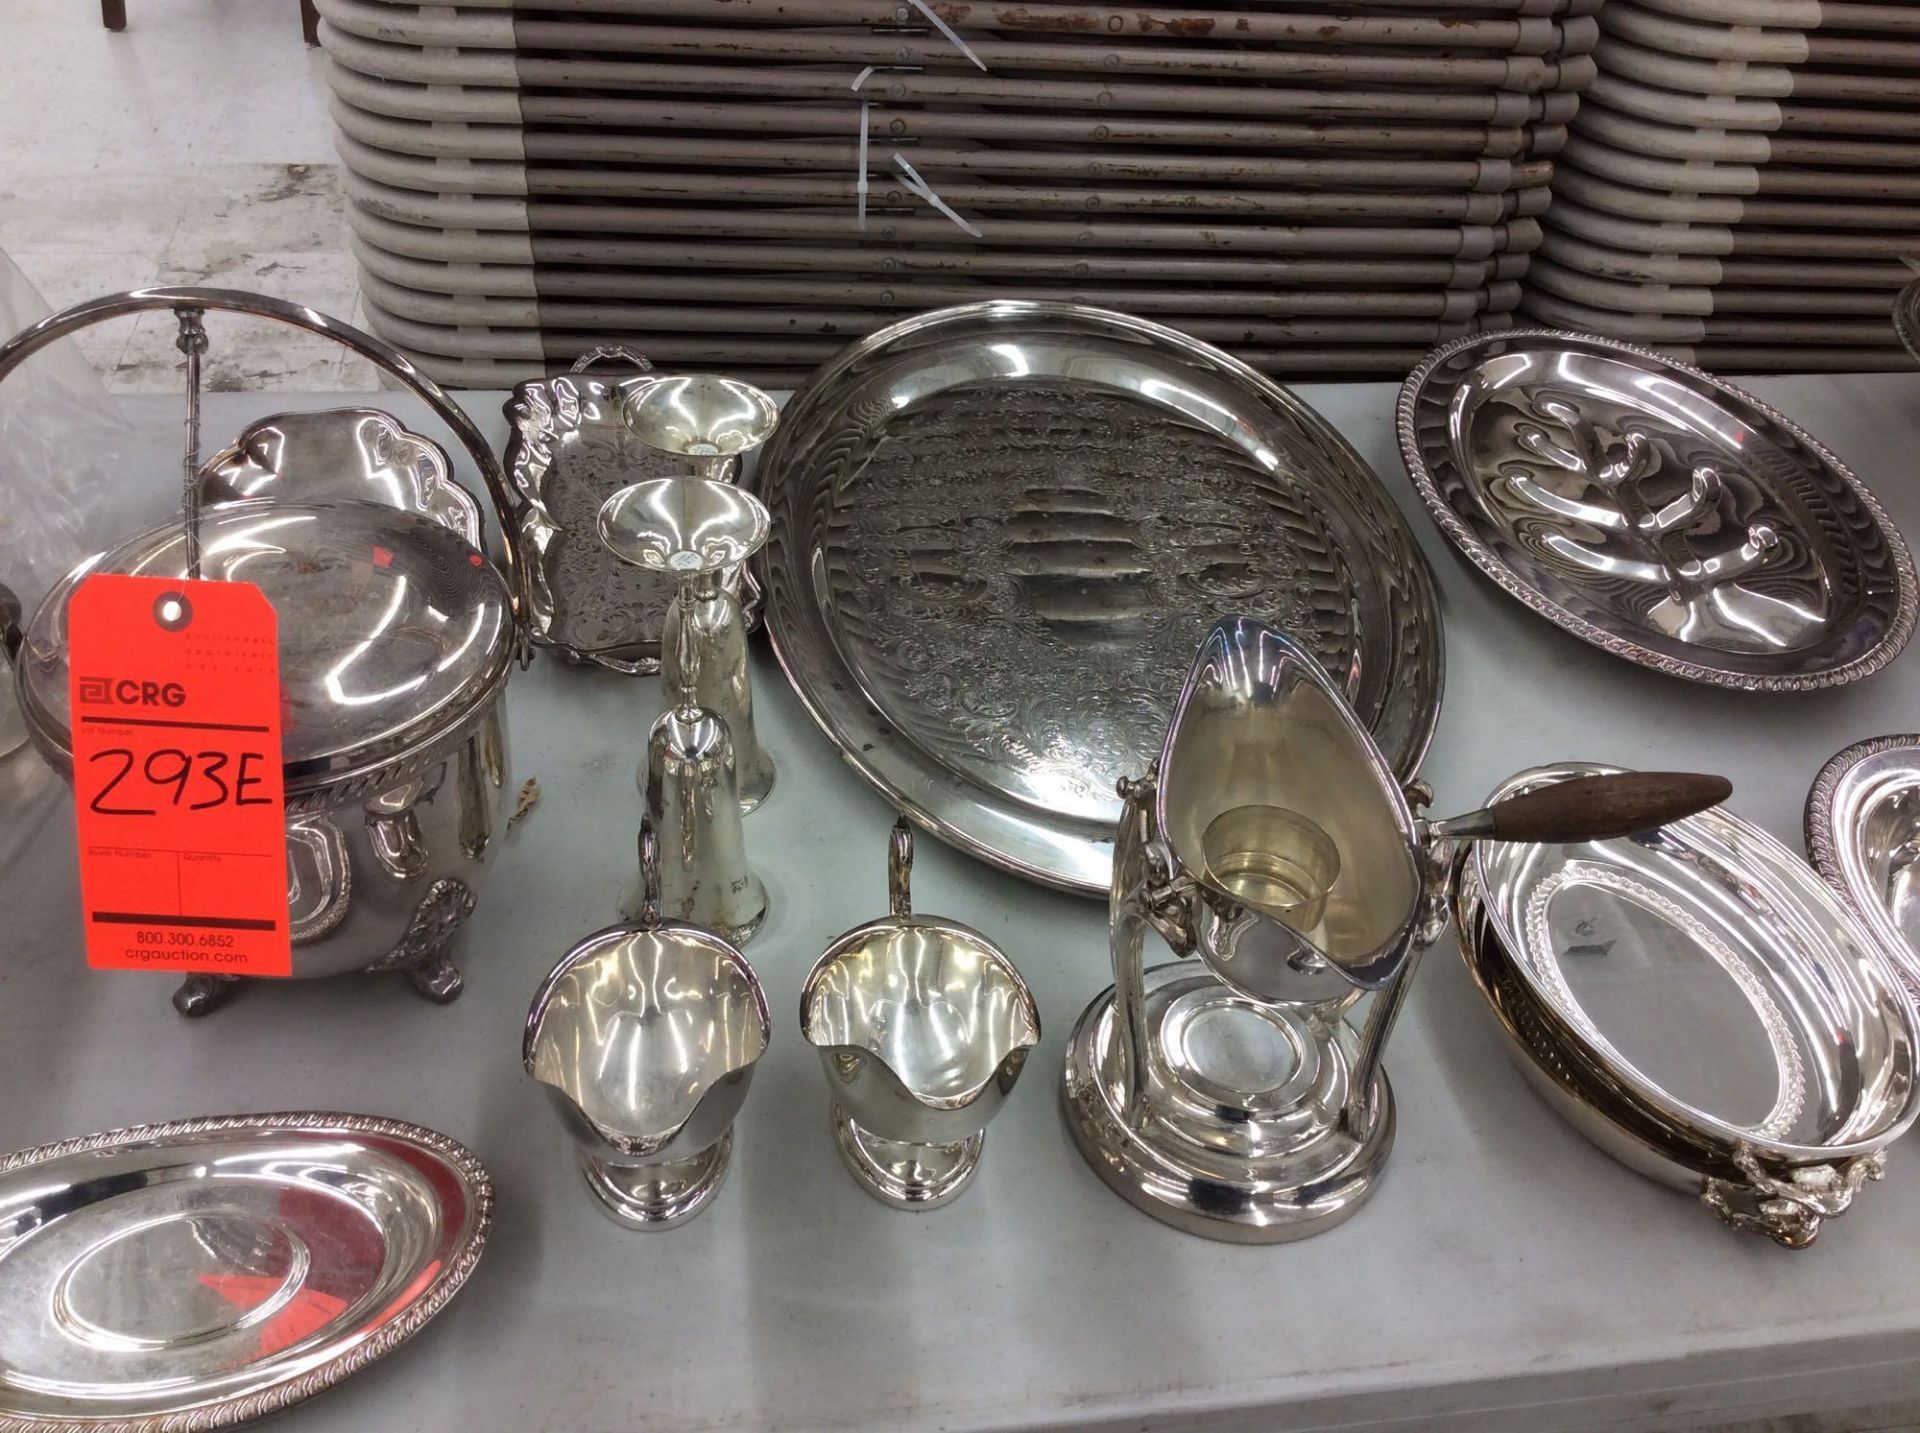 Lot of asst silver-plated and stainless serving trays, bowls, gravy boats, etc. - Image 2 of 3